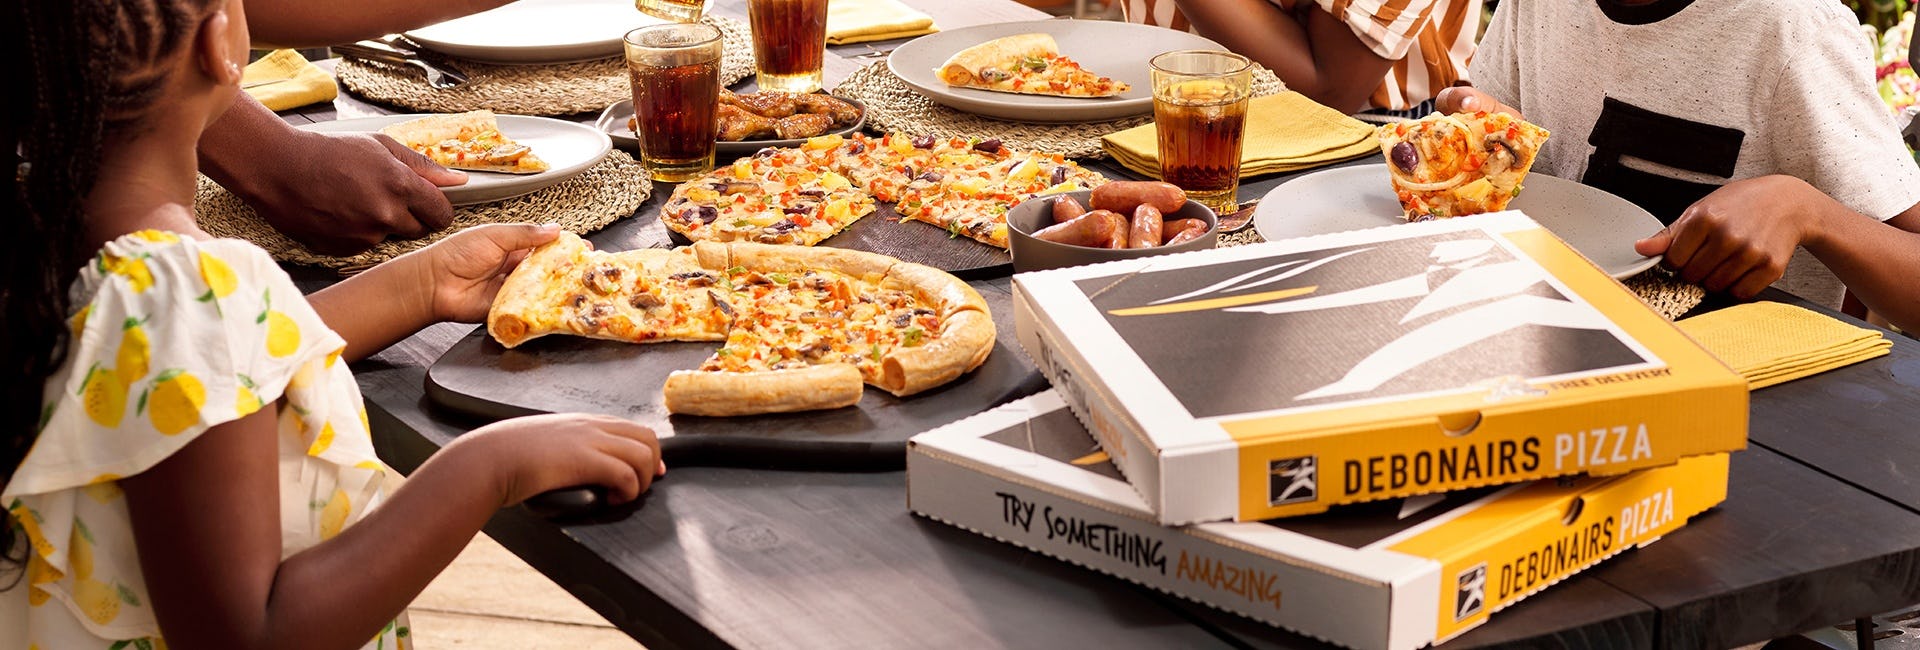 Pizza on a table with Debonairs pizza boxes